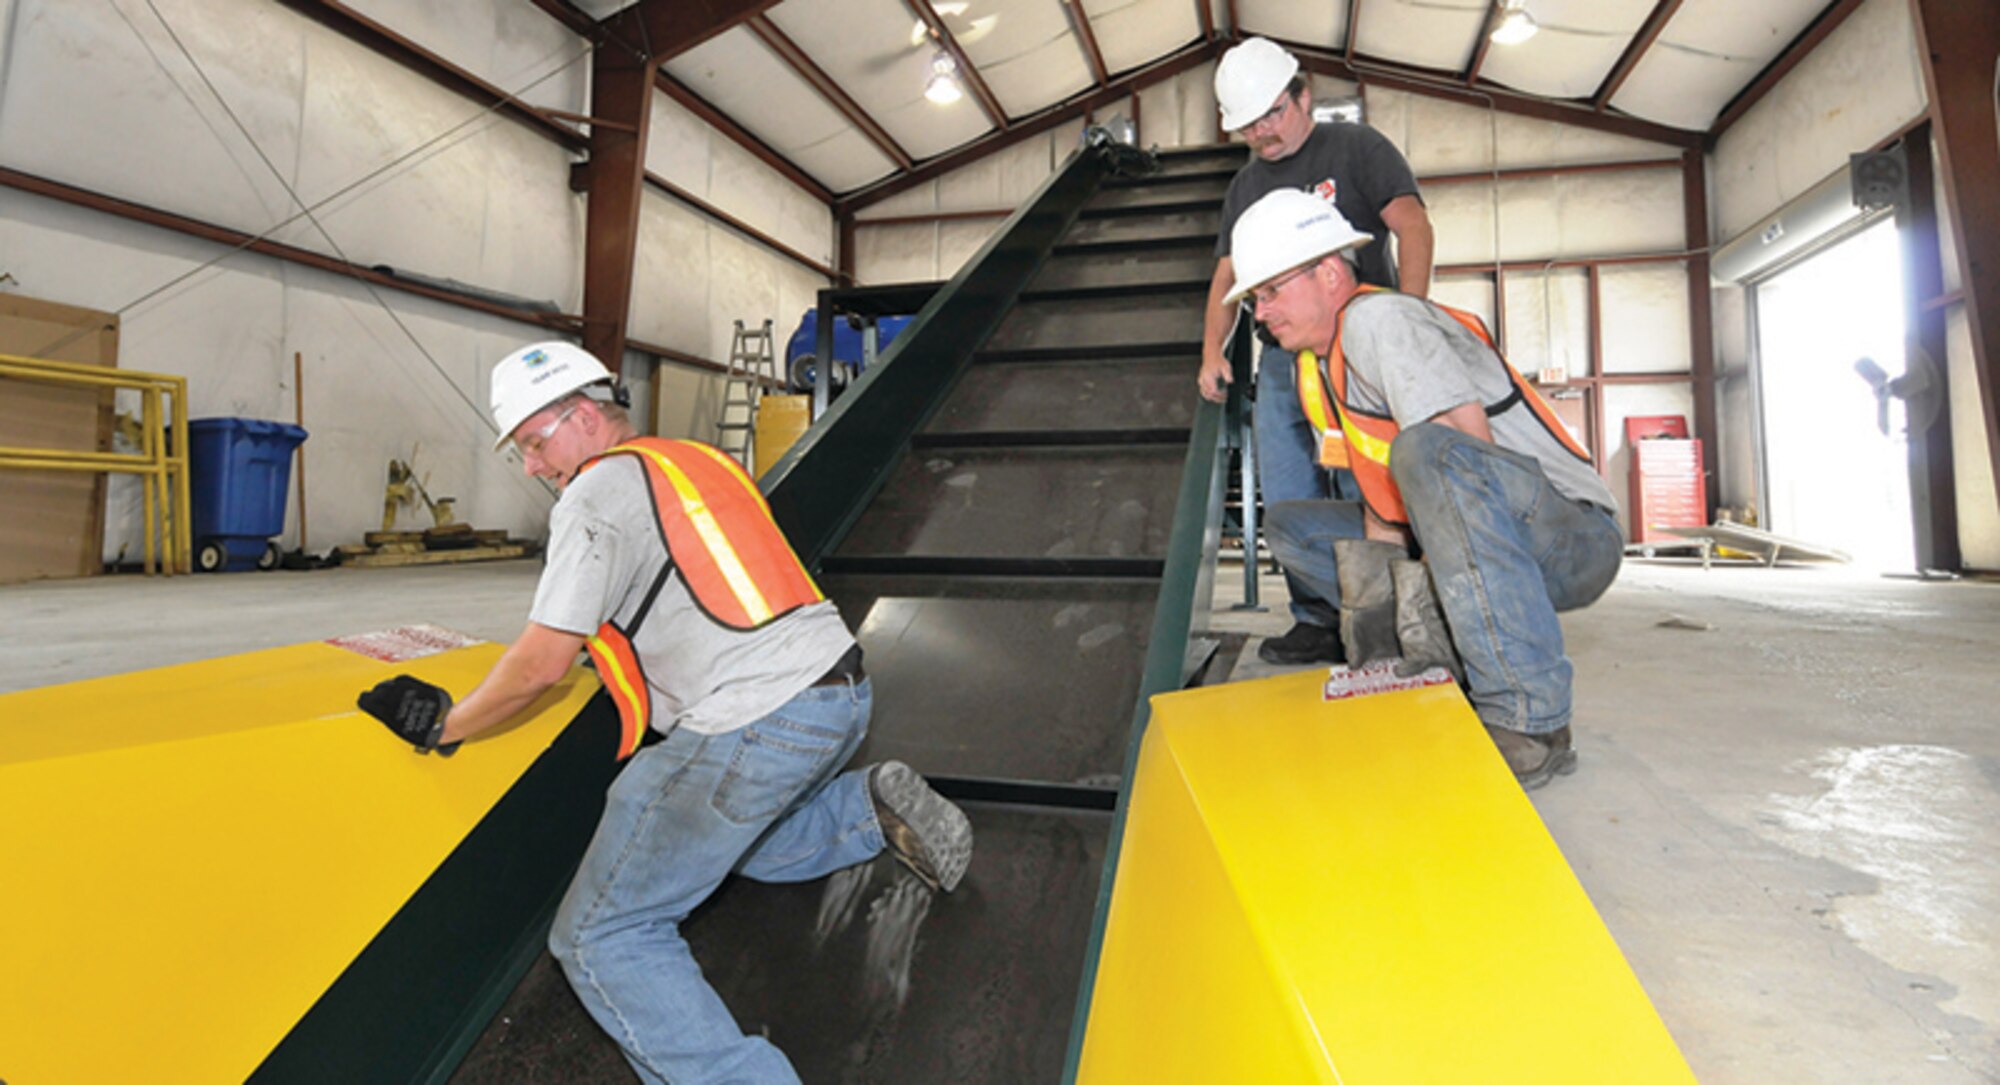 Vick Hobarter, top right, with International Baler, watches as Jay Thurmond, right, and Wyatt James, left, with Recycling Equipment Inc., (REI, Inc.), help to install the conveyer for a newly acquired SST series baler made by International Baler at AEDC’s recycling center. (Photo by: Rick Goodfriend)